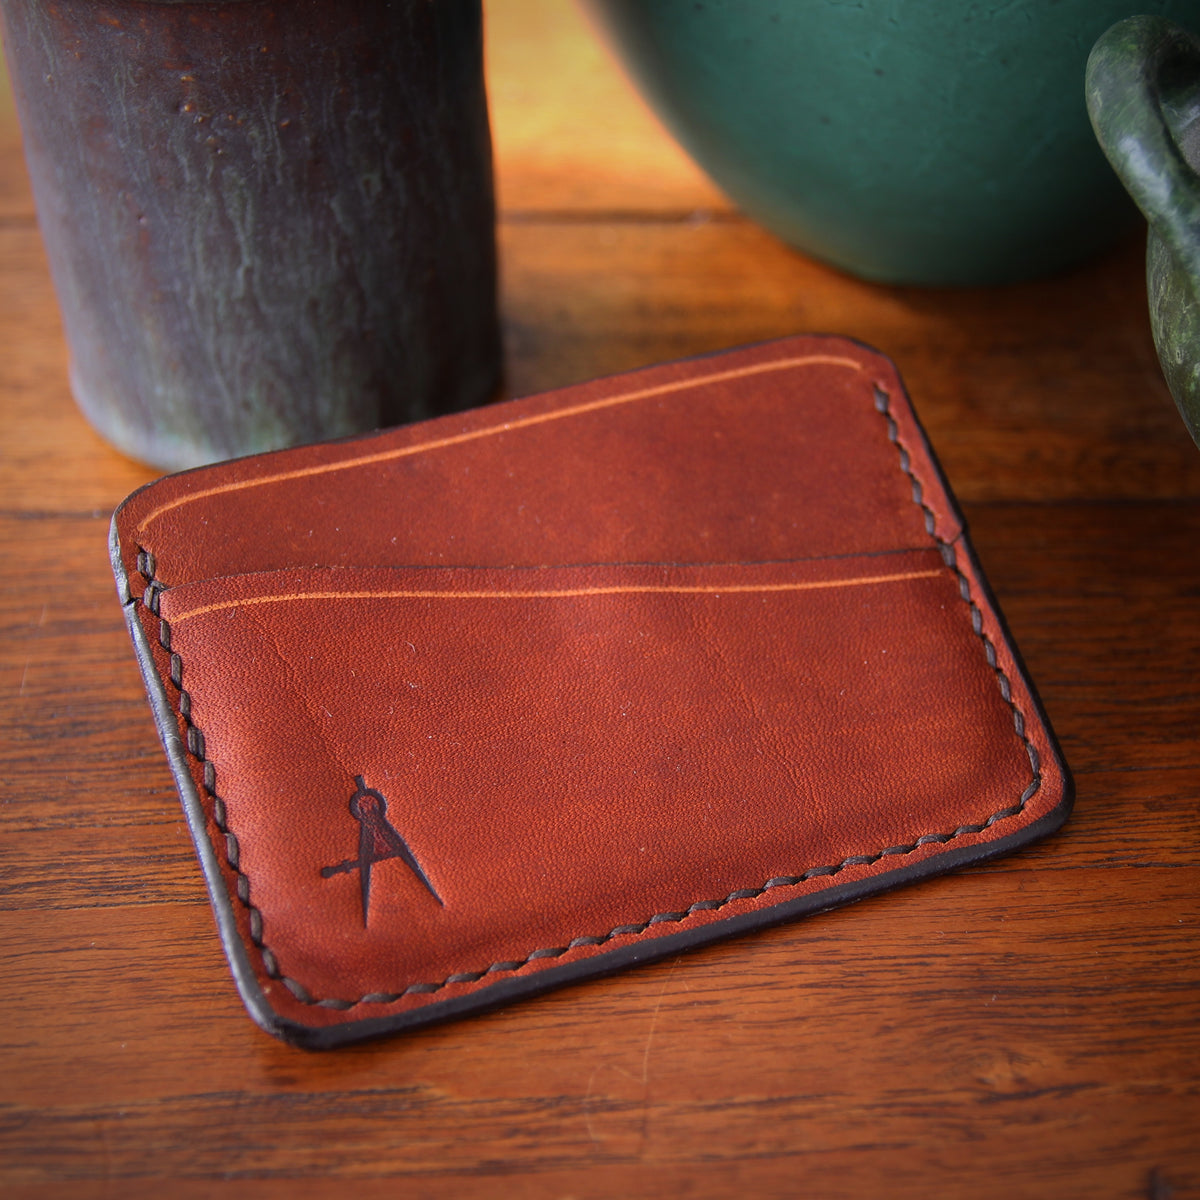 Rustic Hand-Stitched Card Sleeve